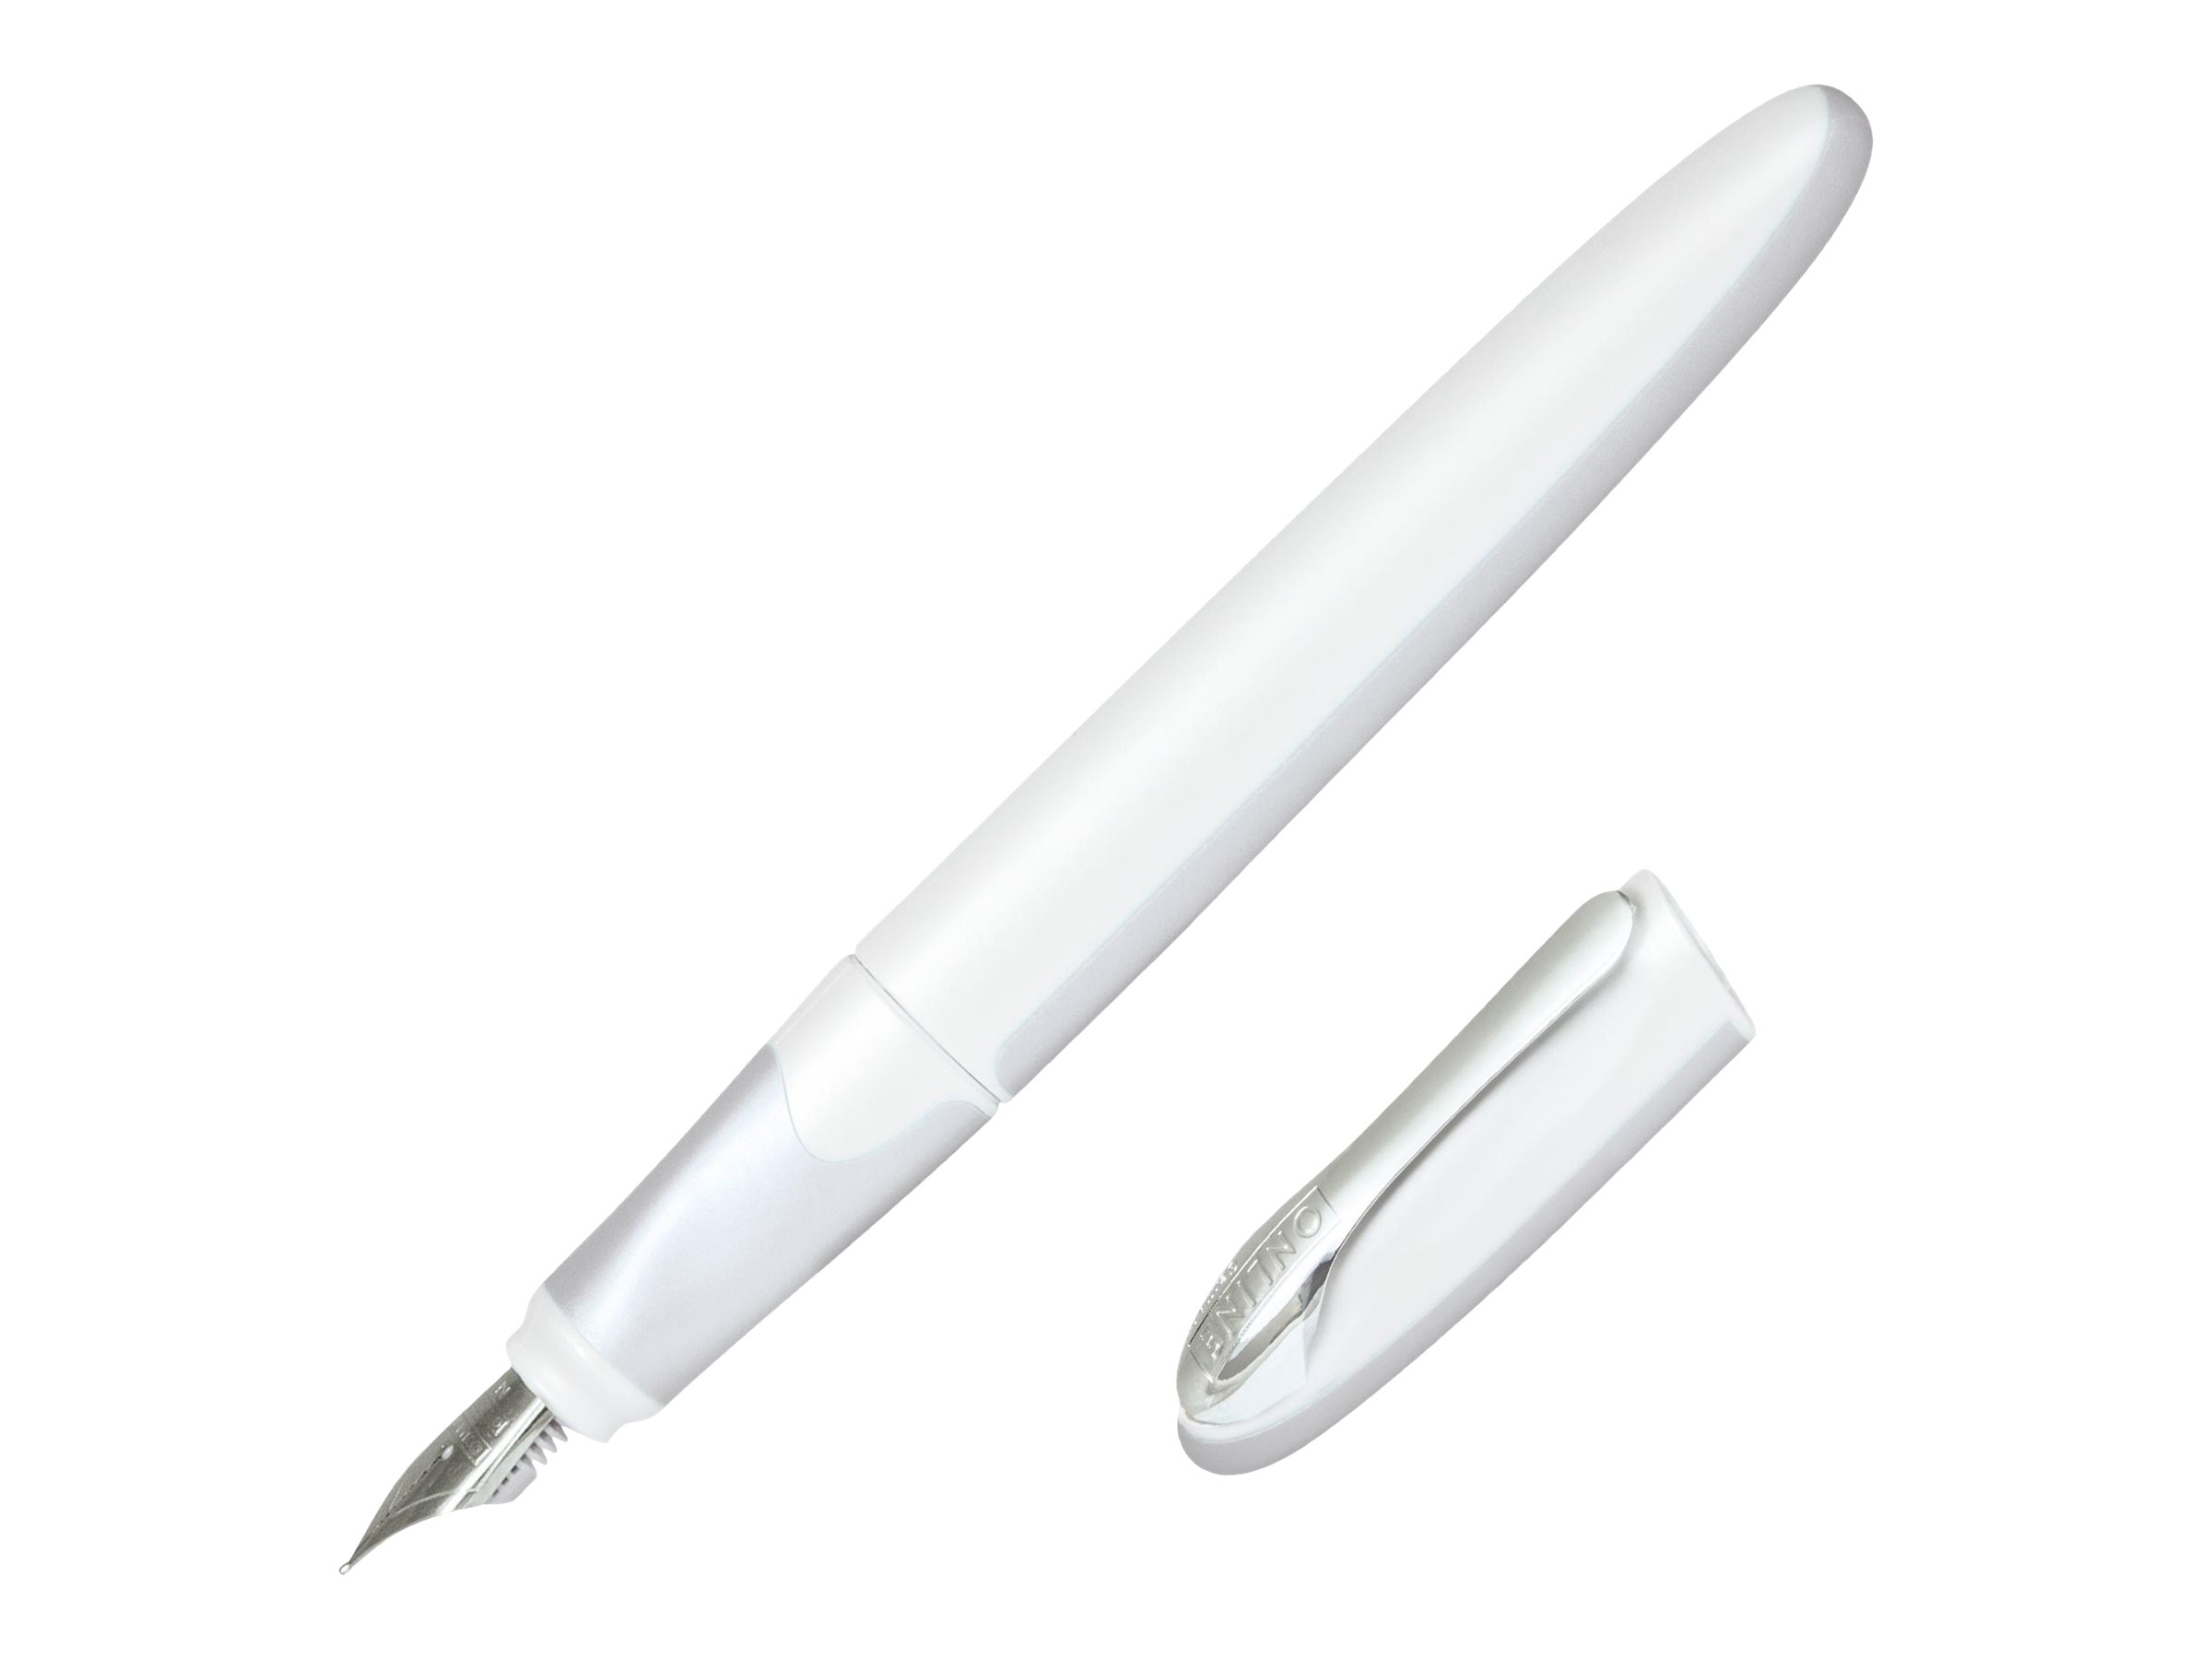 Online Air - Stylo plume - argent pastel - pointe moyenne Pas Cher